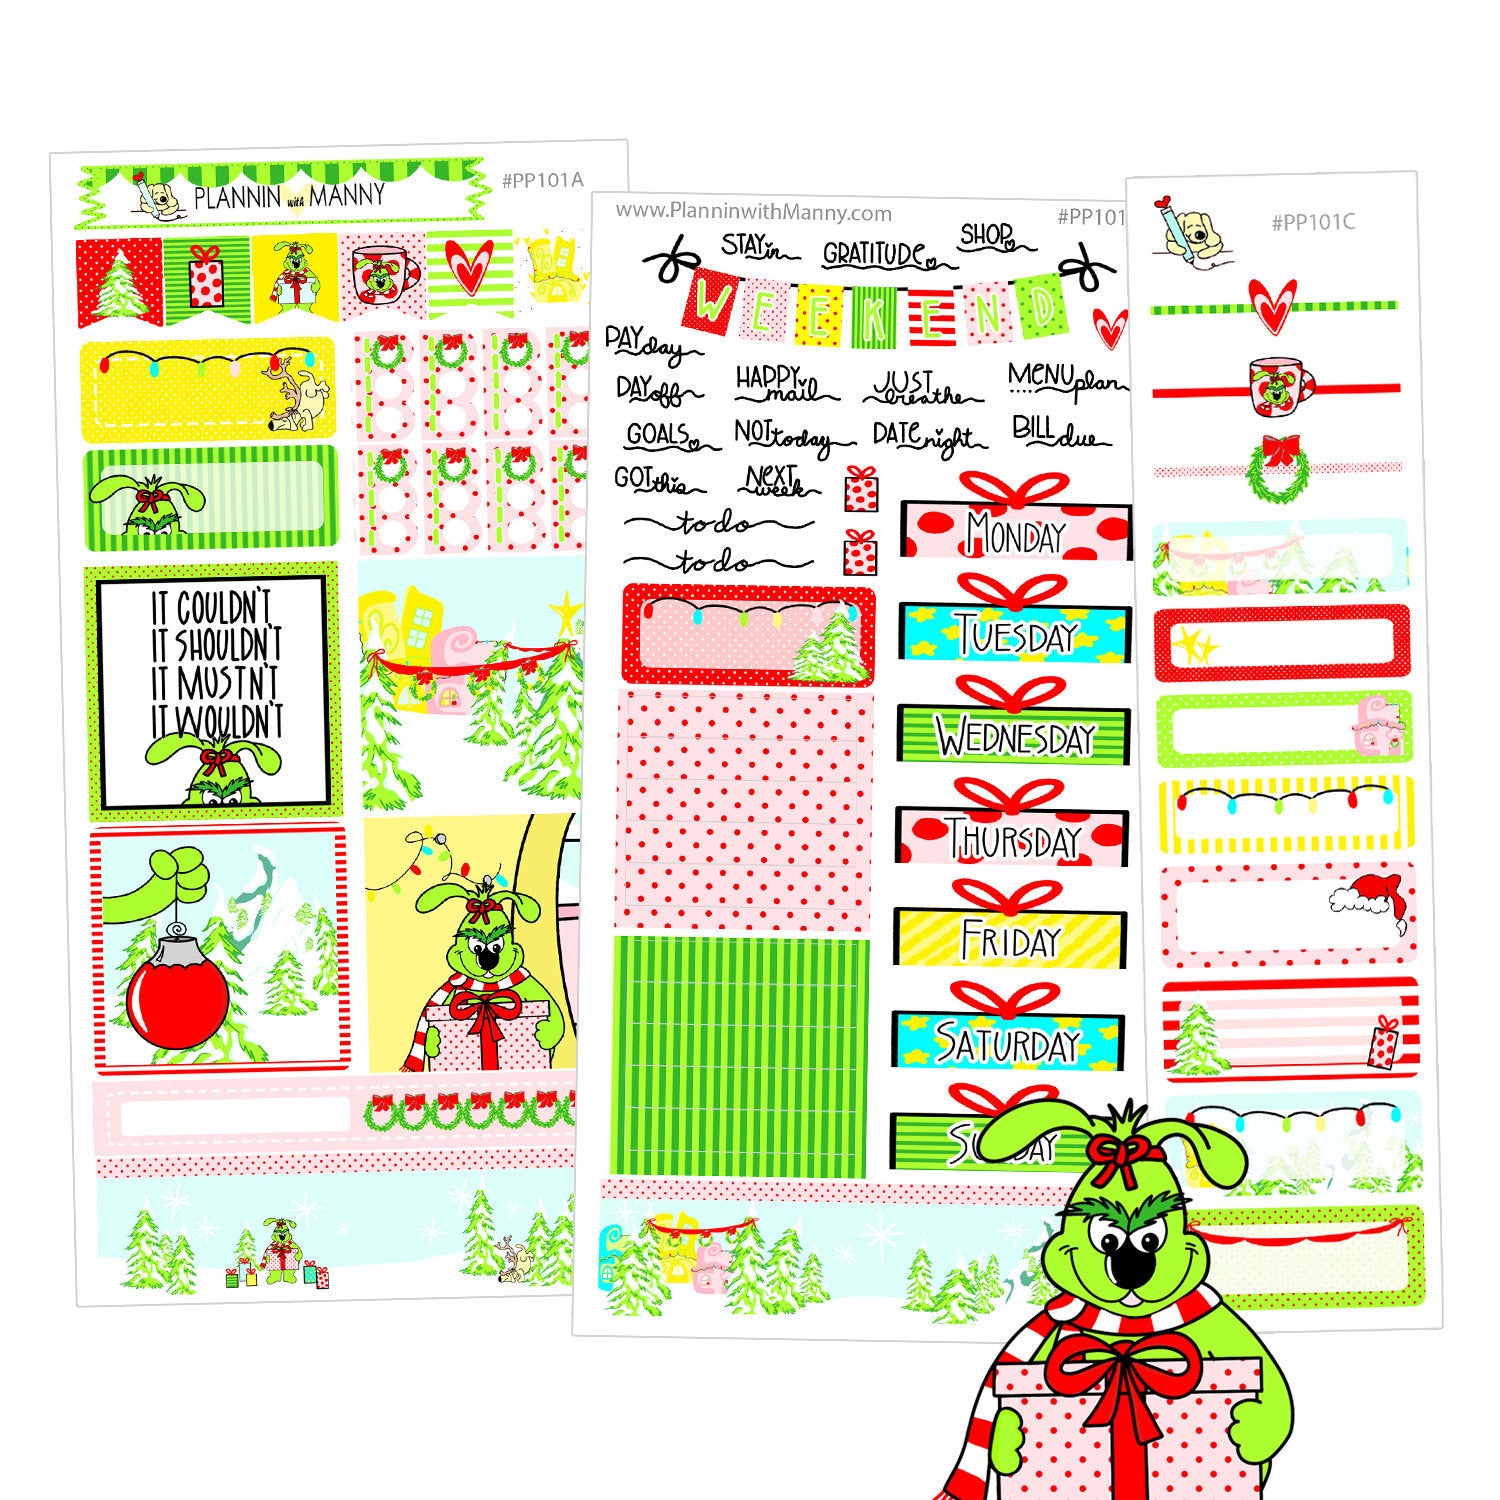 PP101, PP WEEKS Weekly Kit - Going Green Collection